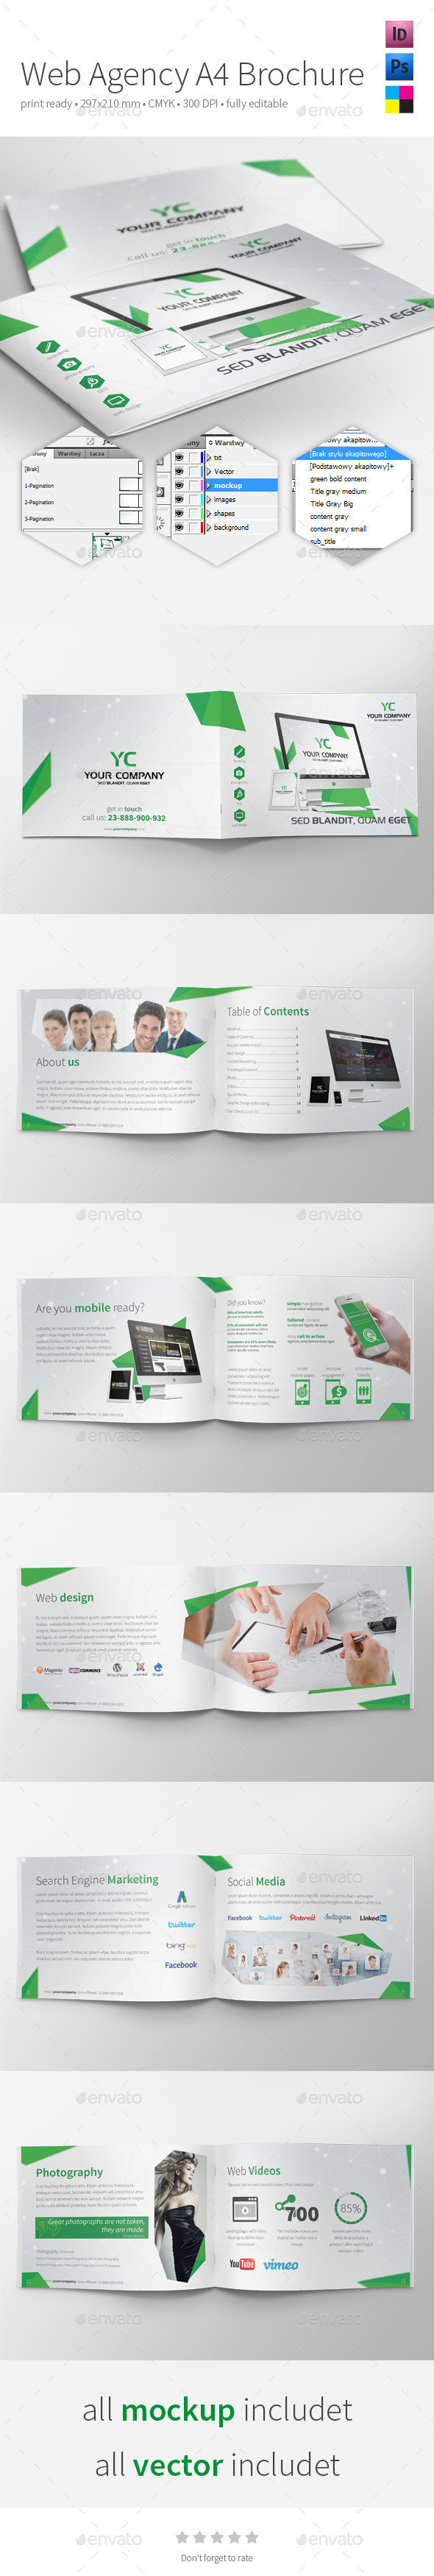 Web 20agency 20brochure preview